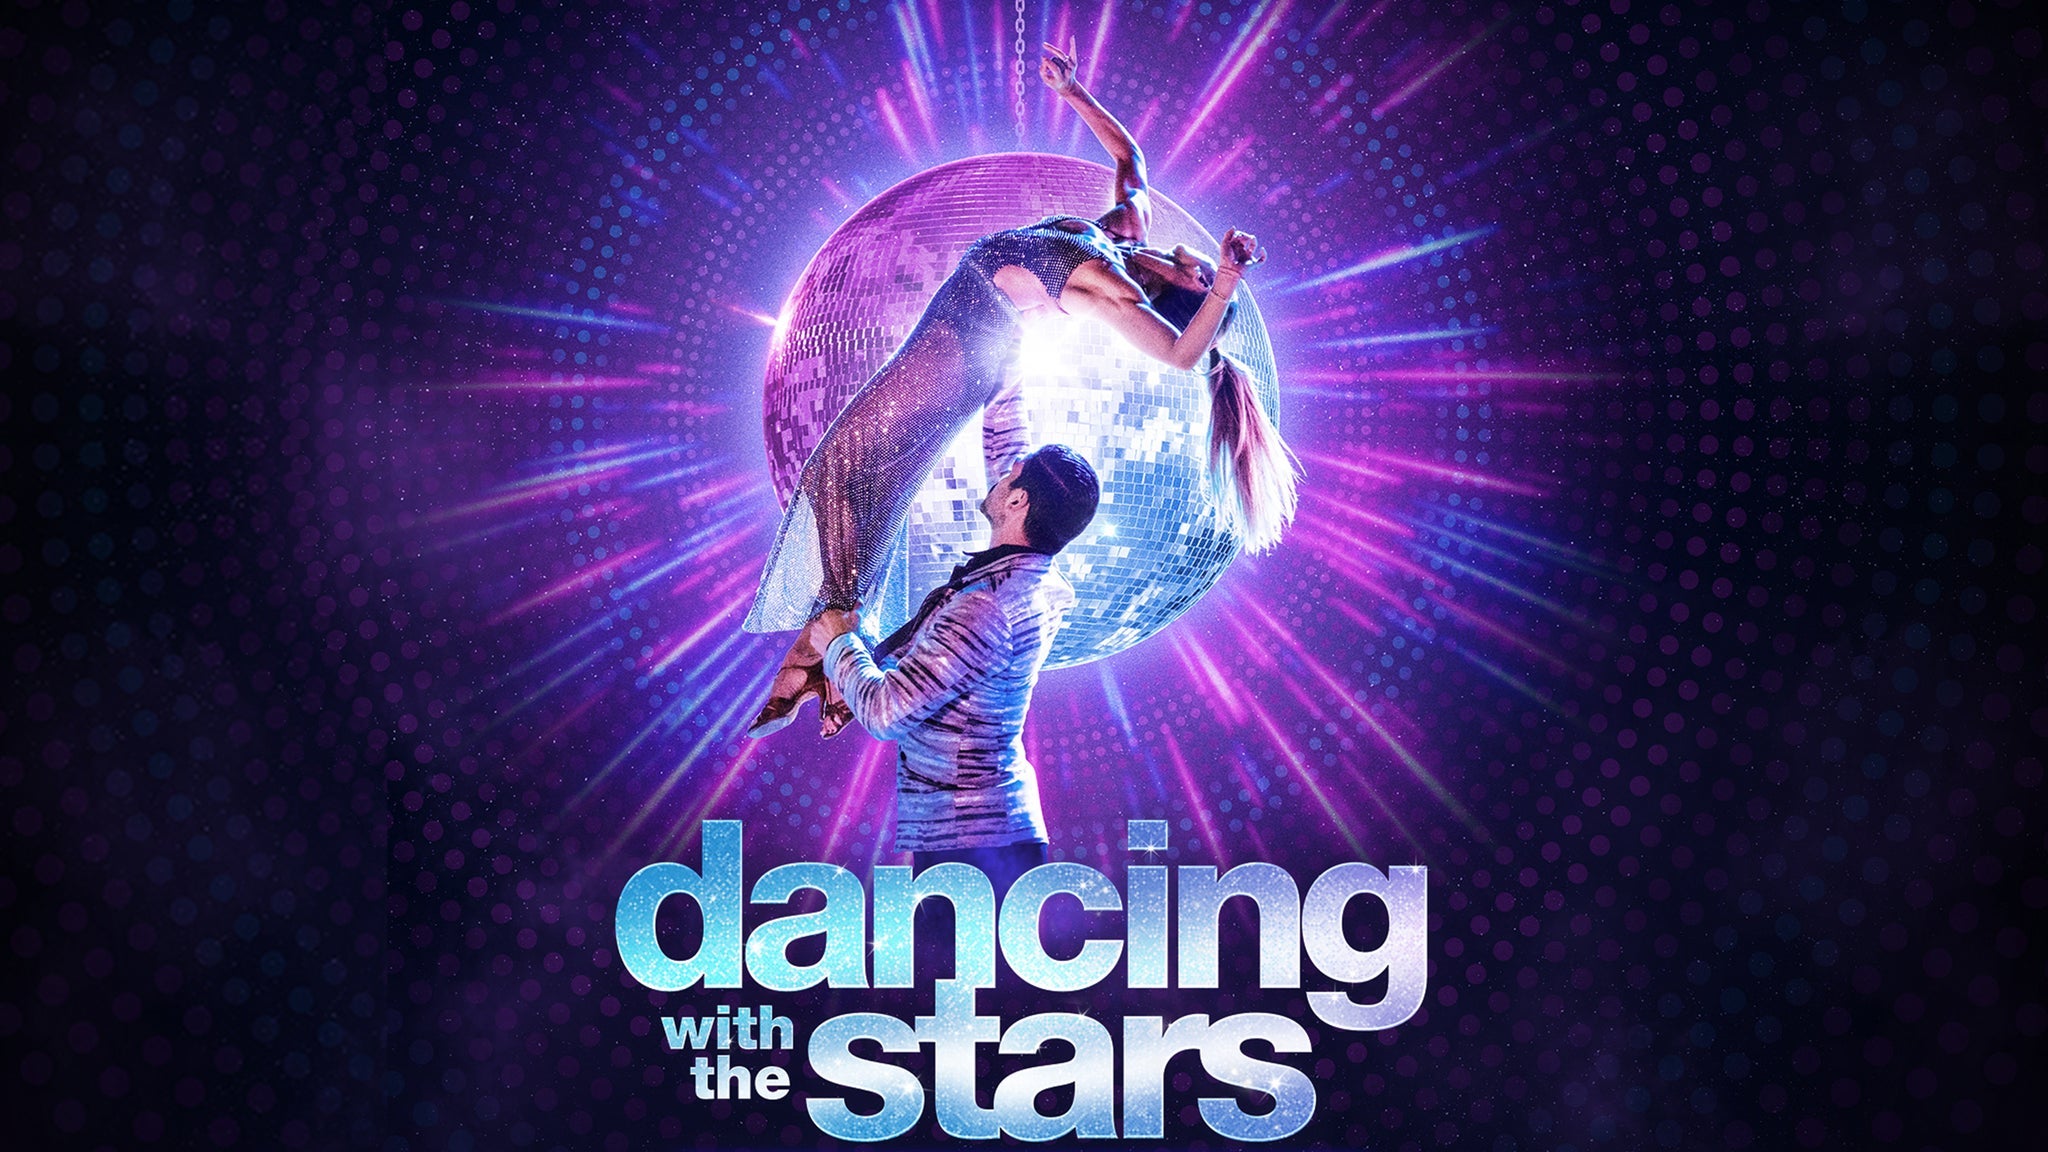 Dancing With the Stars at Altria Theater